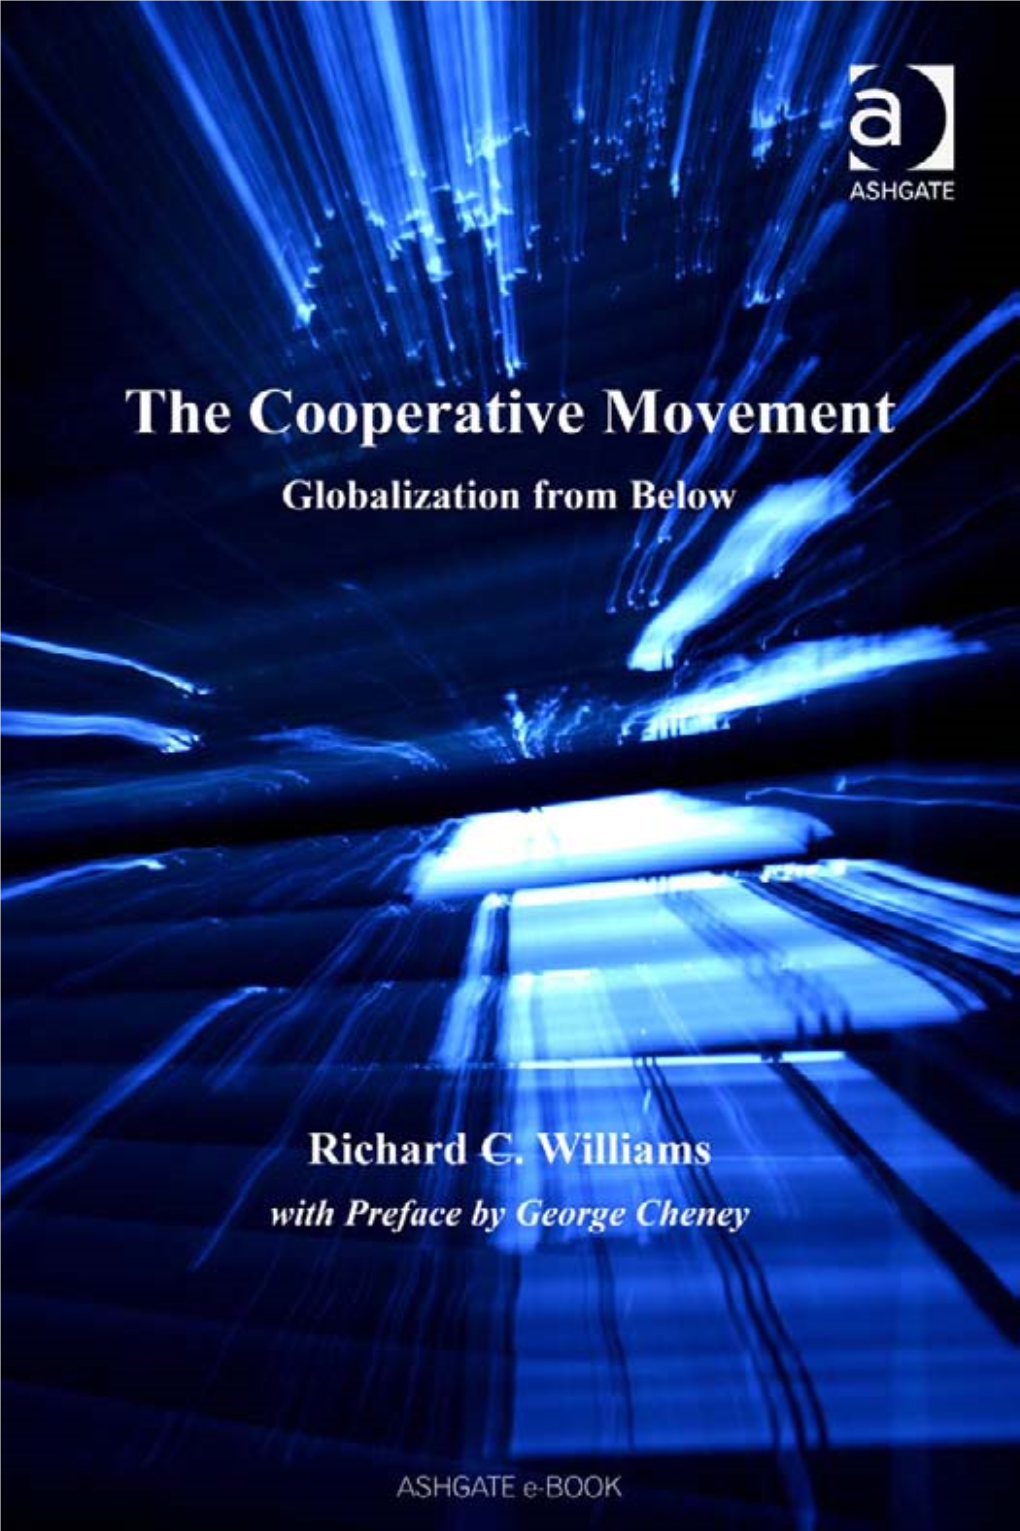 THE COOPERATIVE MOVEMENT Corporate Social Responsibility Series